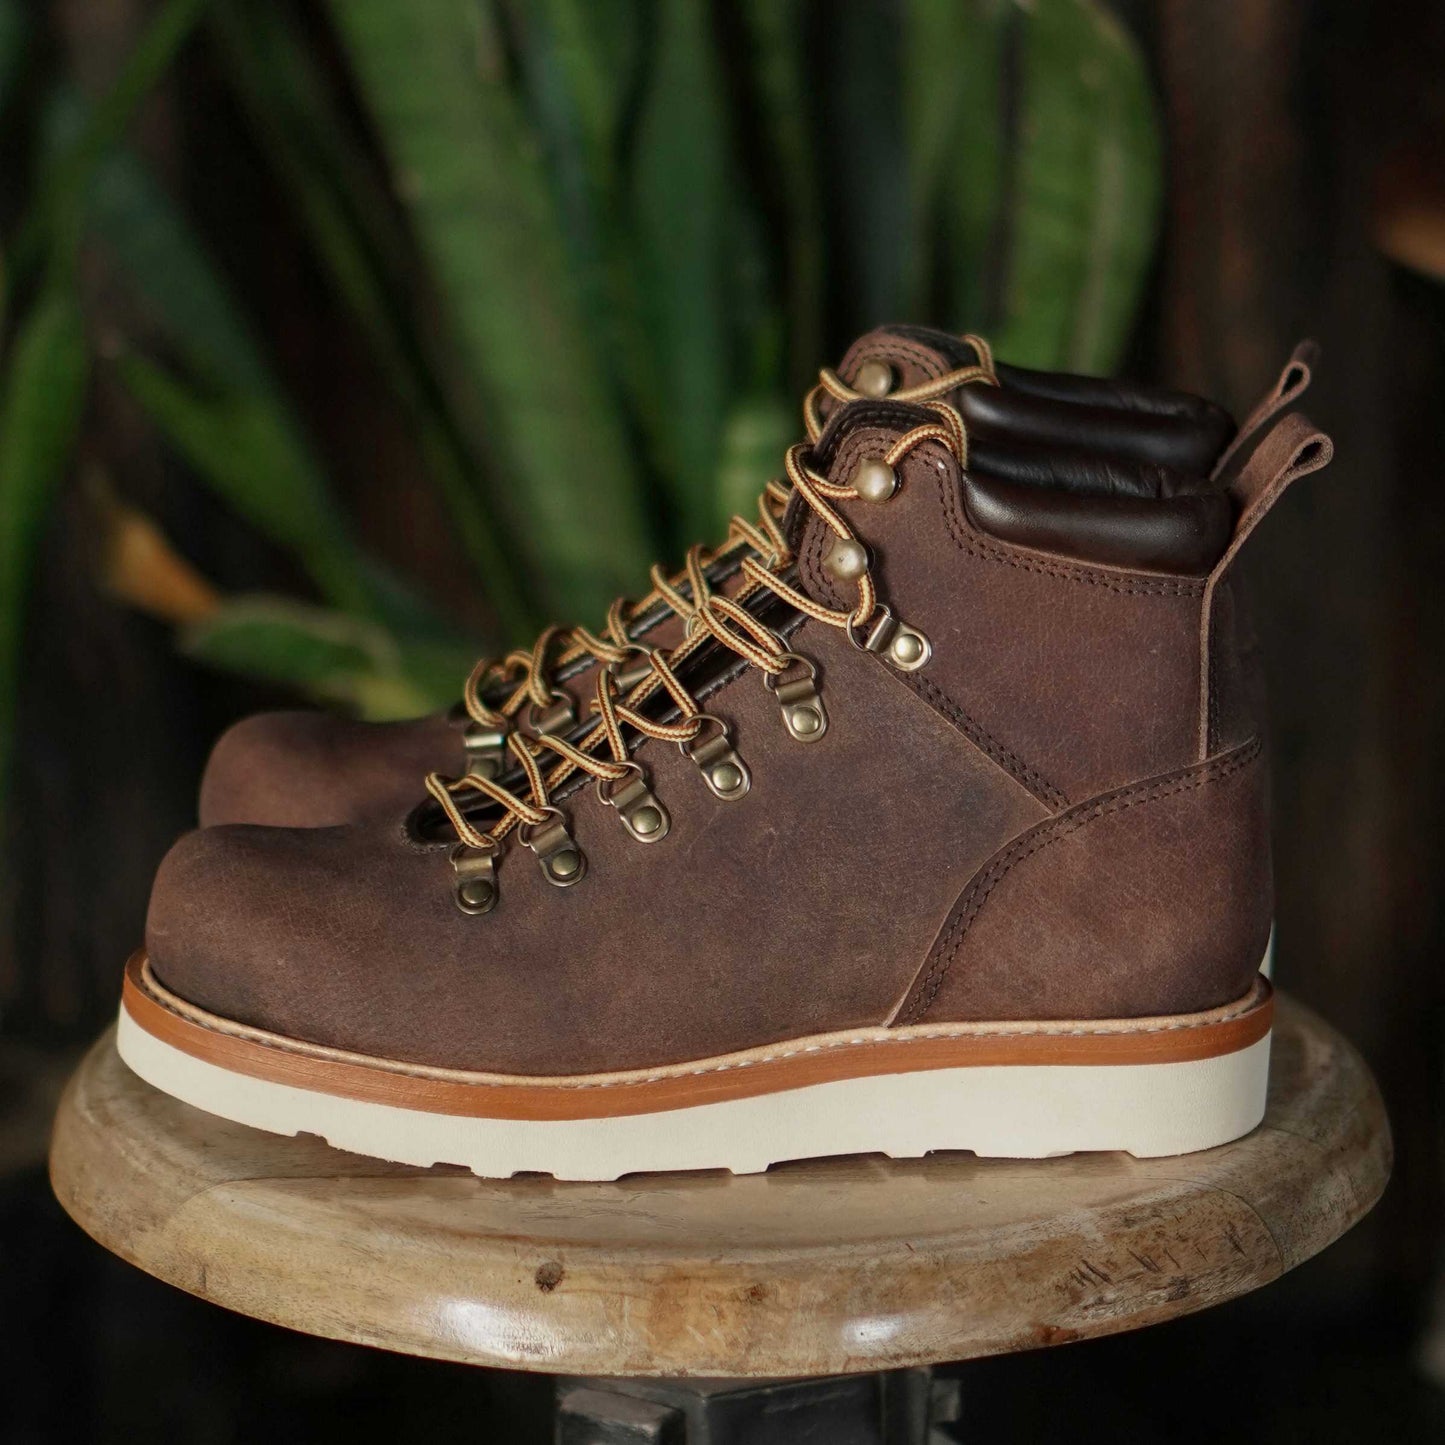 Bottes de trail (Vintage Brown) Goodyear Welted